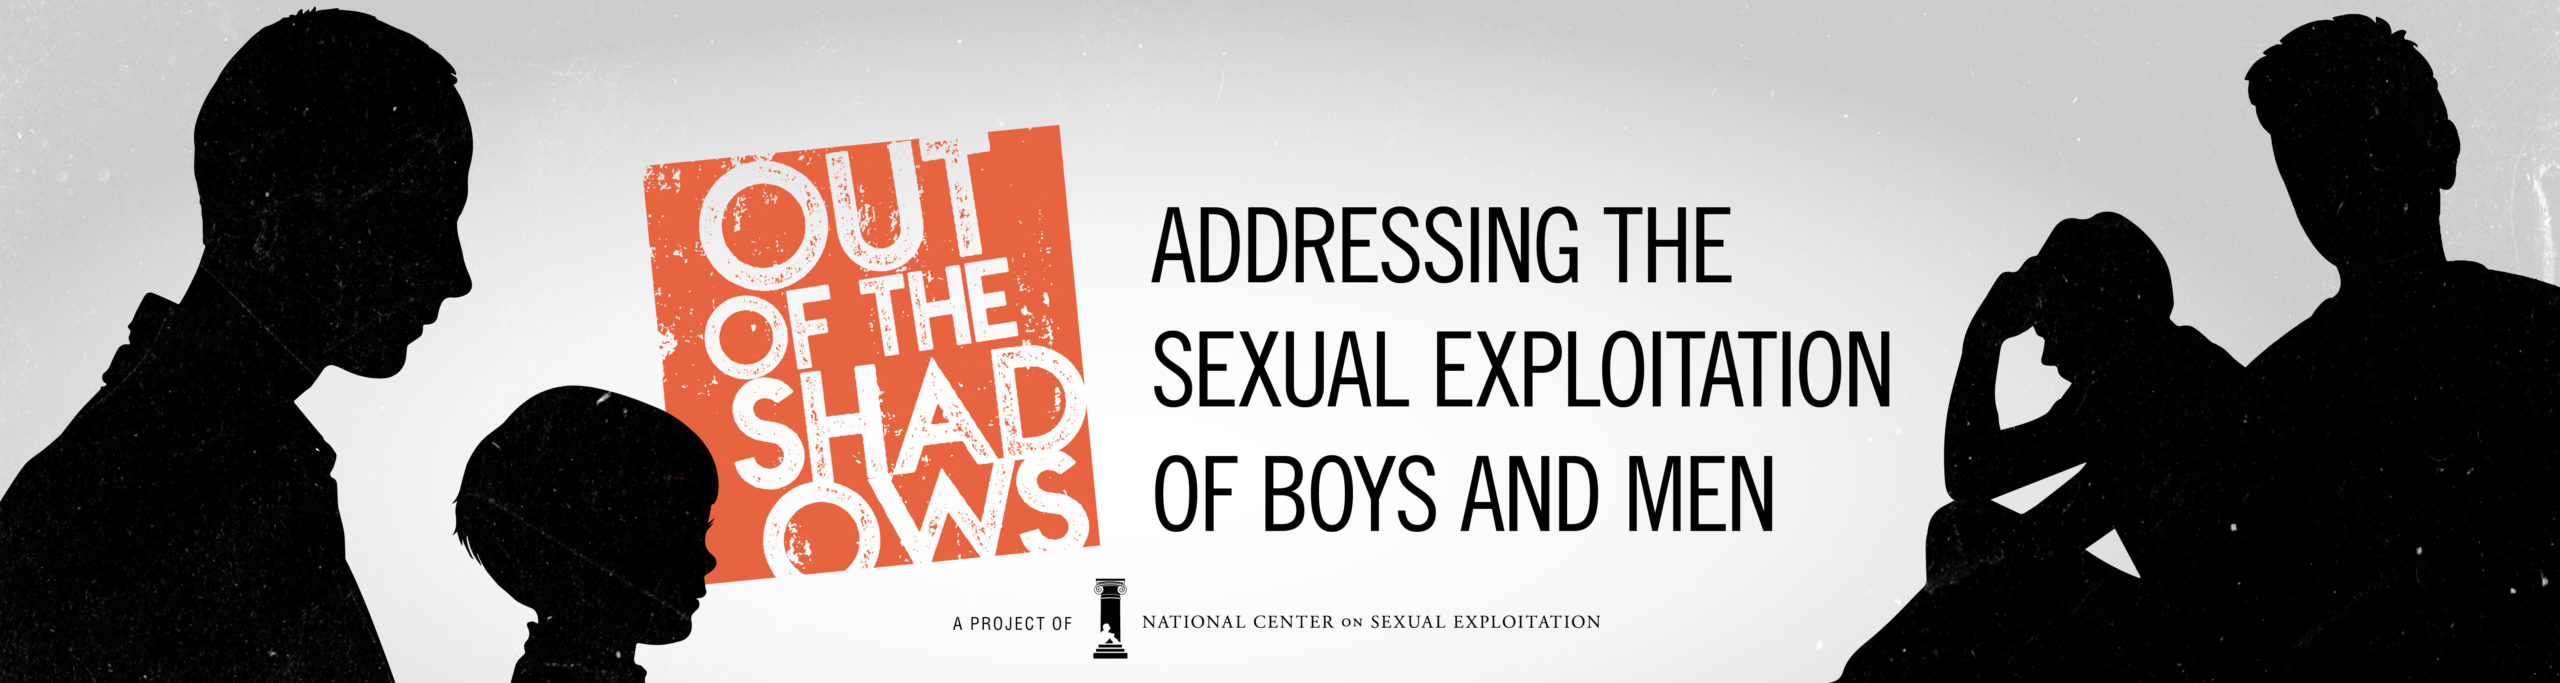 Out of the Shadows: Addressing the Sexual Exploitation of Boys and Men